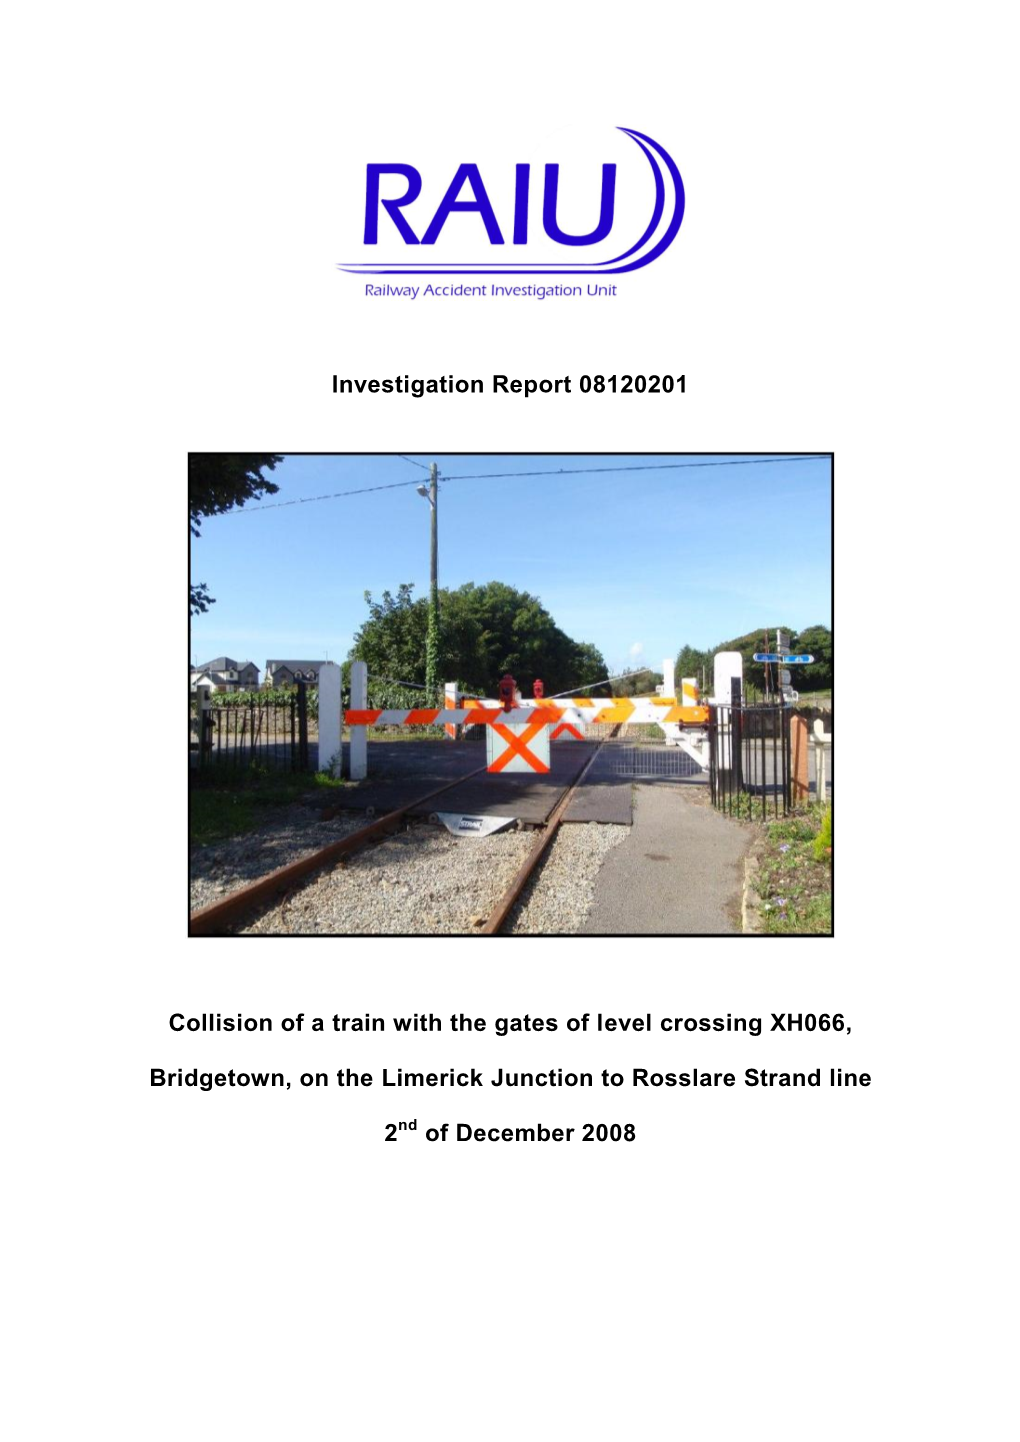 Investigation Report 08120201 Collision of a Train with the Gates of Level Crossing XH066, Bridgetown, on the Limerick Junction to Rosslare Strand Line